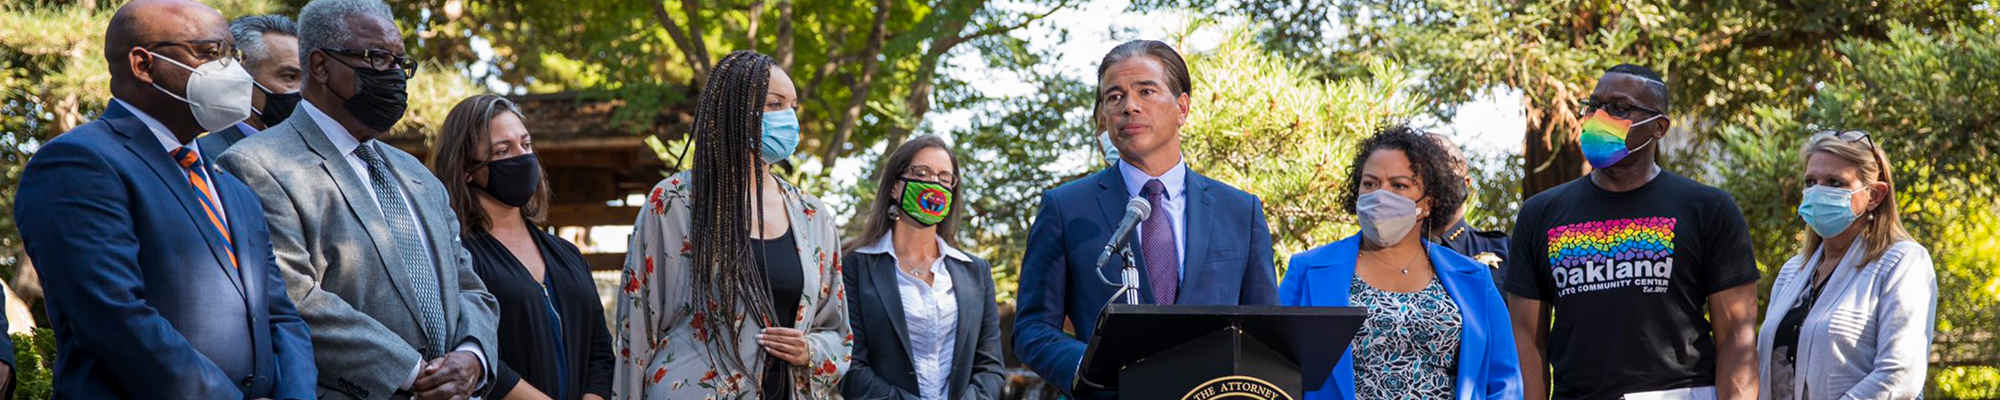 Attorney General Bonta at the Hate Crimes Roundtable